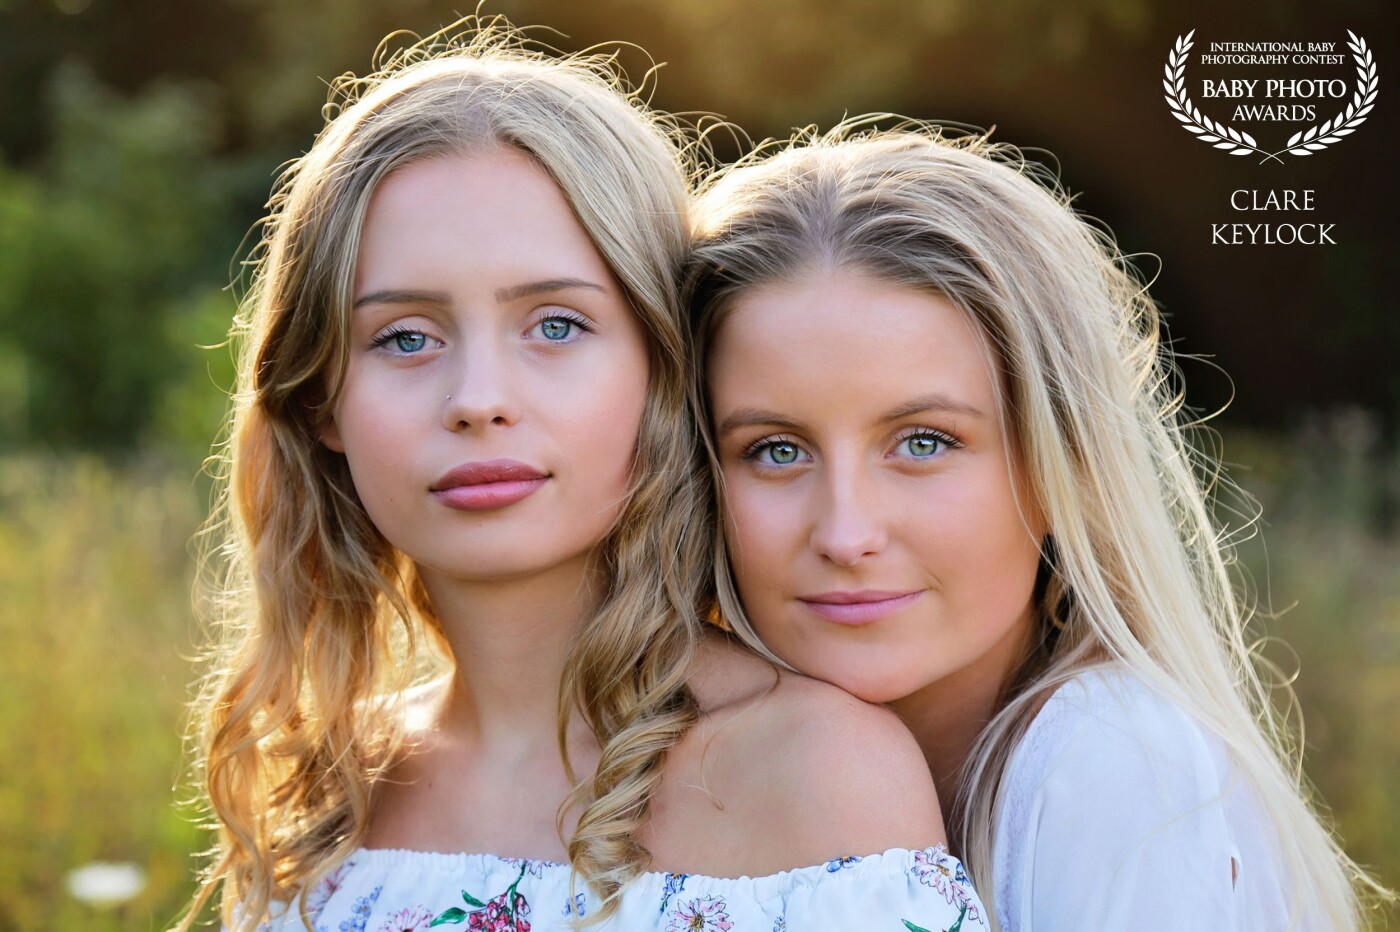 I have been lucky enough to photograph these beautiful girls a few times now. It was the perfect summer's evening and the light was perfect. I could photograph these girls every day, so beautiful. 